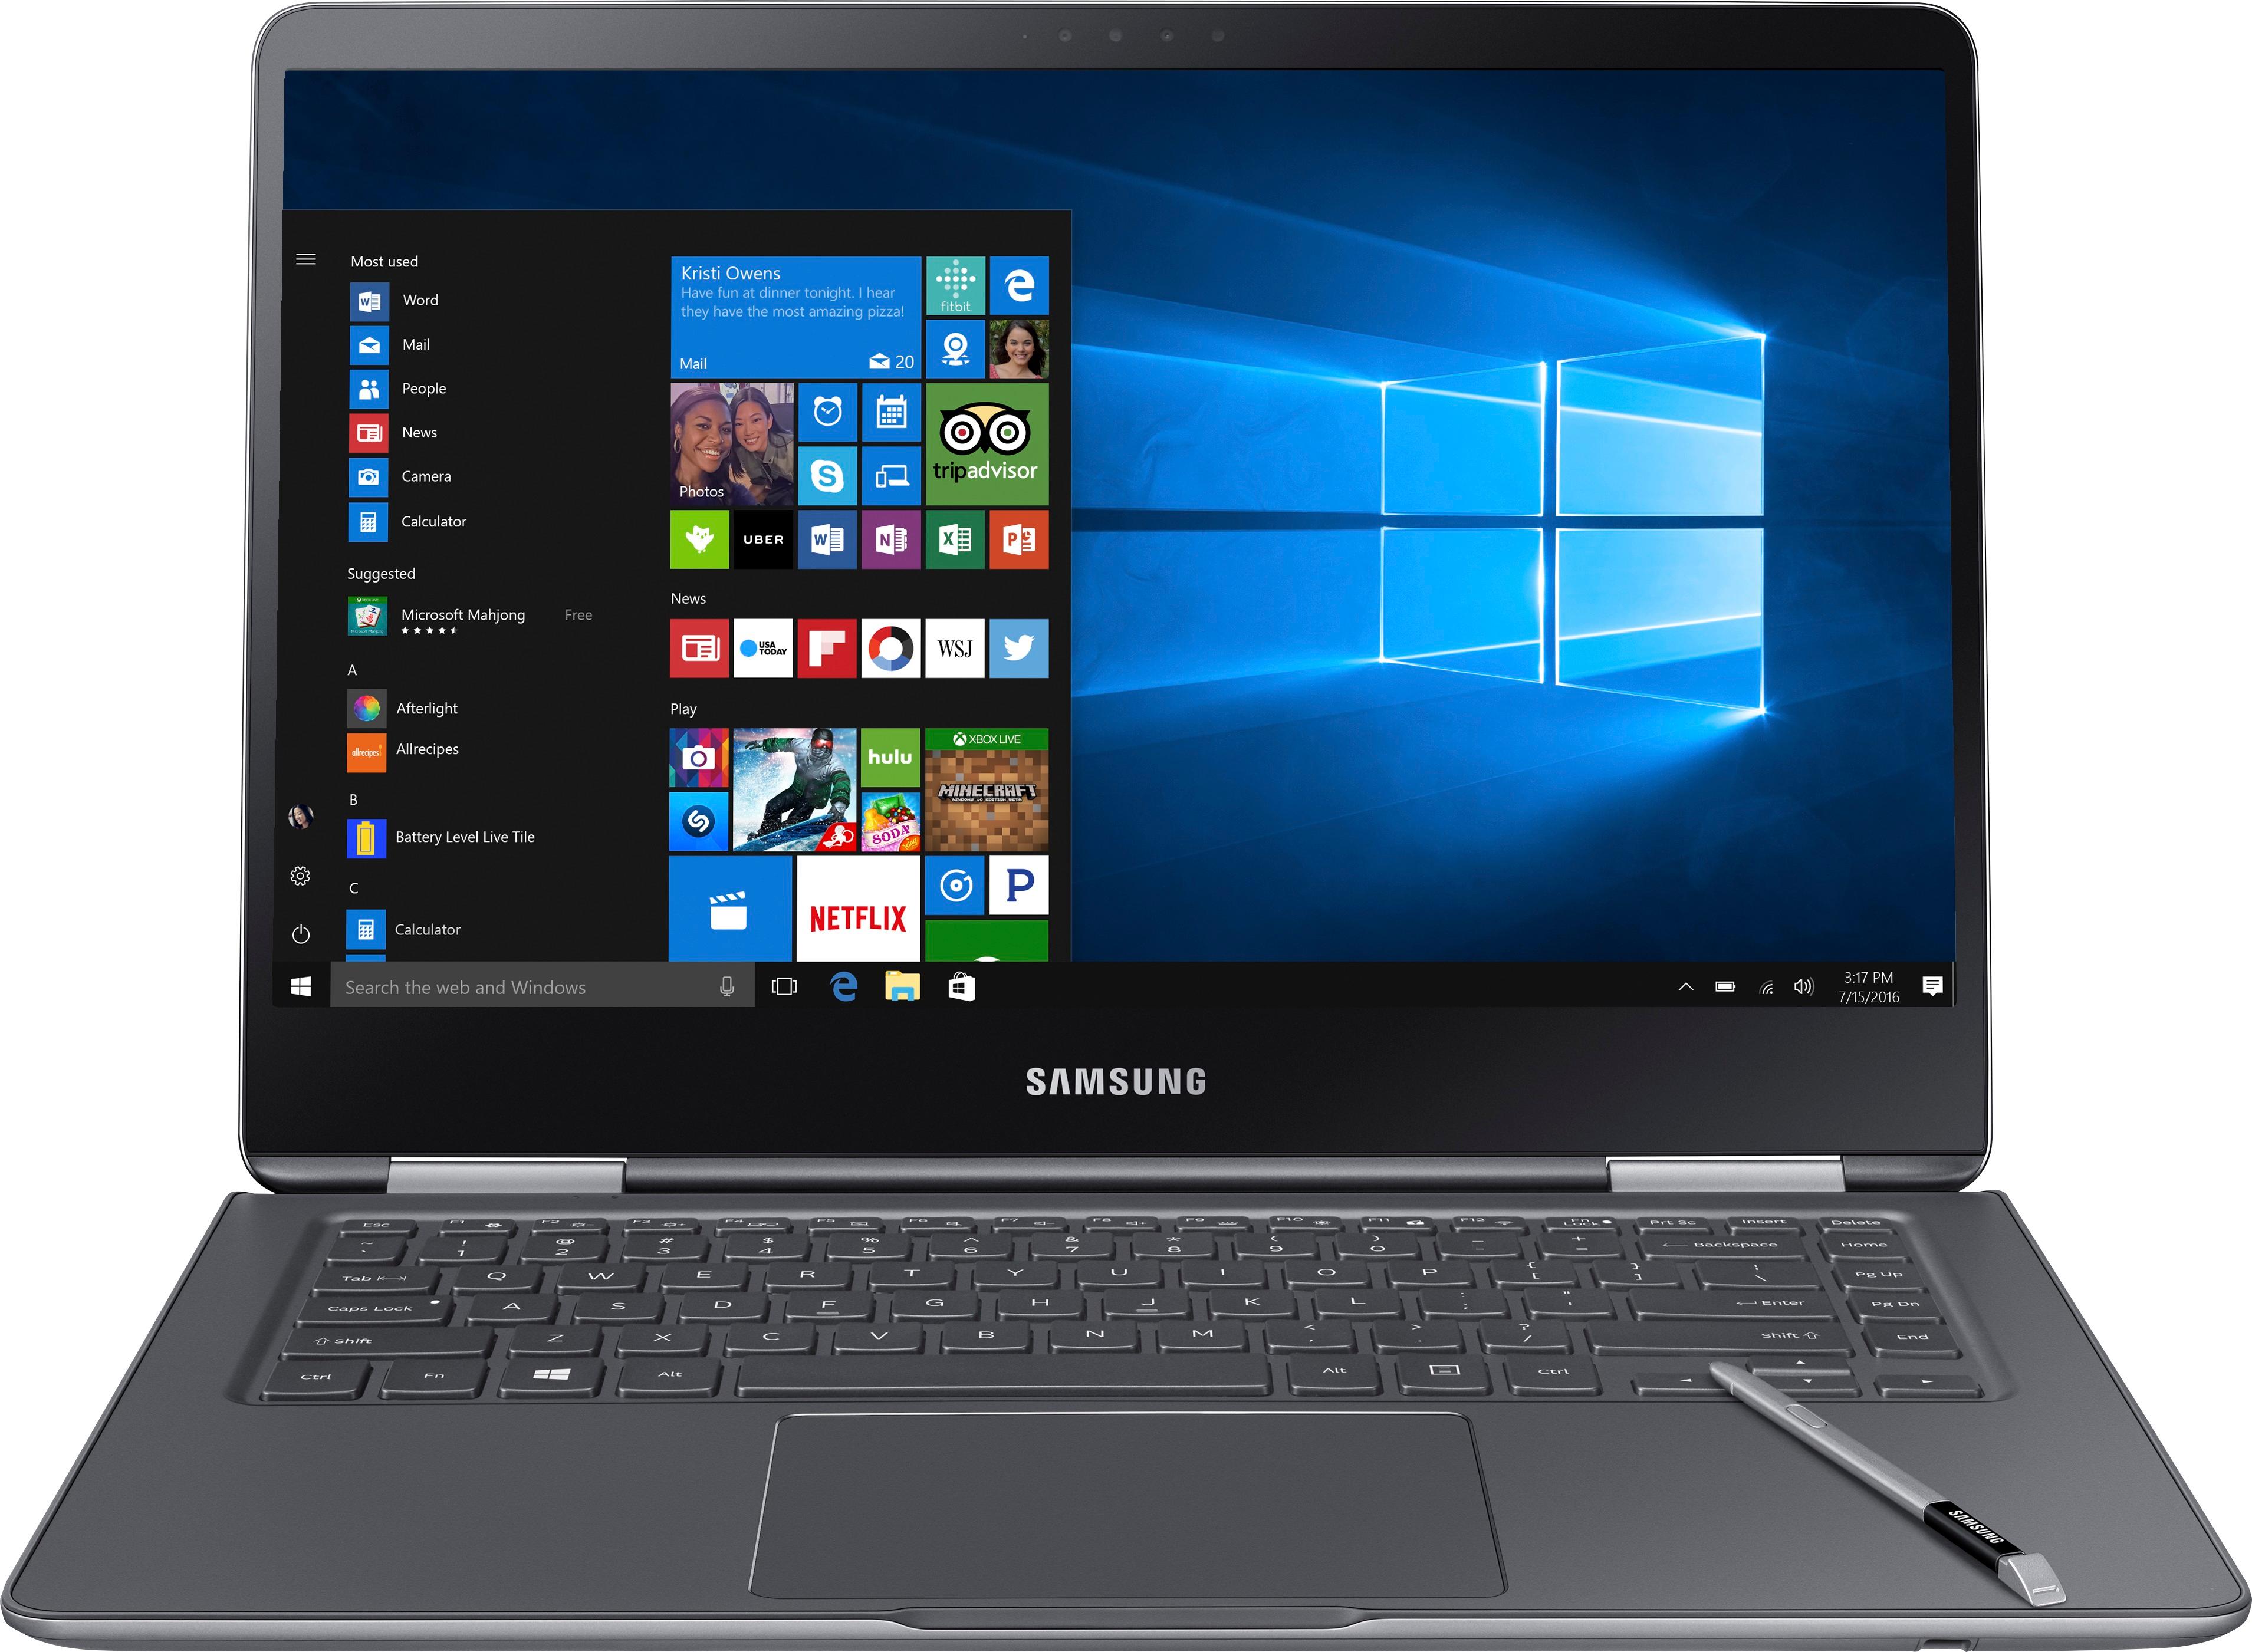 Taille whisky aanvaarden Samsung Notebook 9 Pro 15" Touch-Screen Laptop Intel Core i7 16GB Memory  AMD Radeon 540 256GB Solid State Drive Titan Silver NP940X5M-X01US - Best  Buy